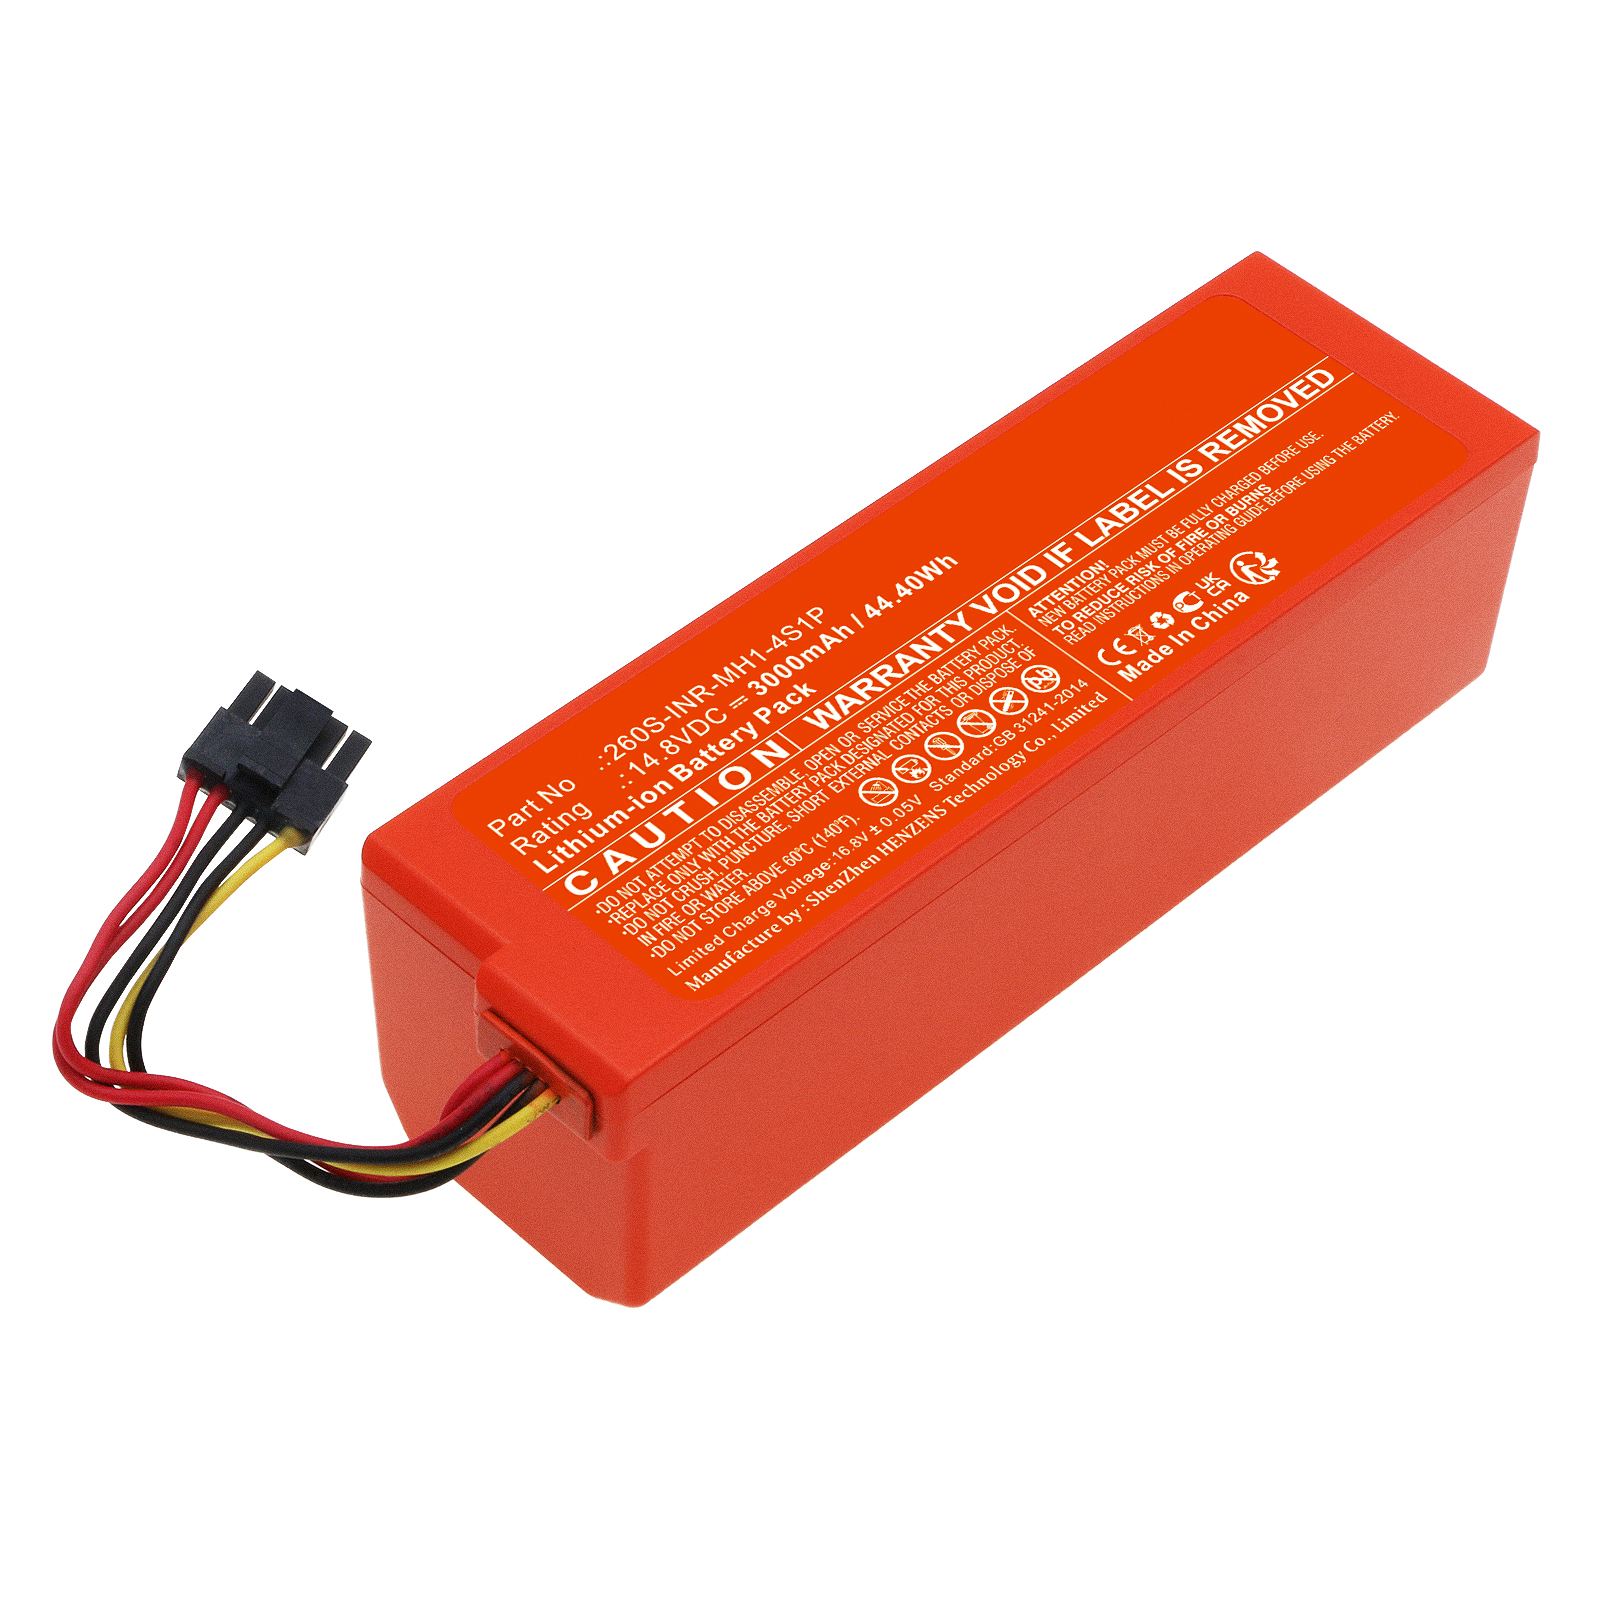 Synergy Digital Vacuum Cleaner Battery, Compatible with Xiaomi 260S-INR-MH1-4S1P Vacuum Cleaner Battery (Li-ion, 14.8V, 3000mAh)